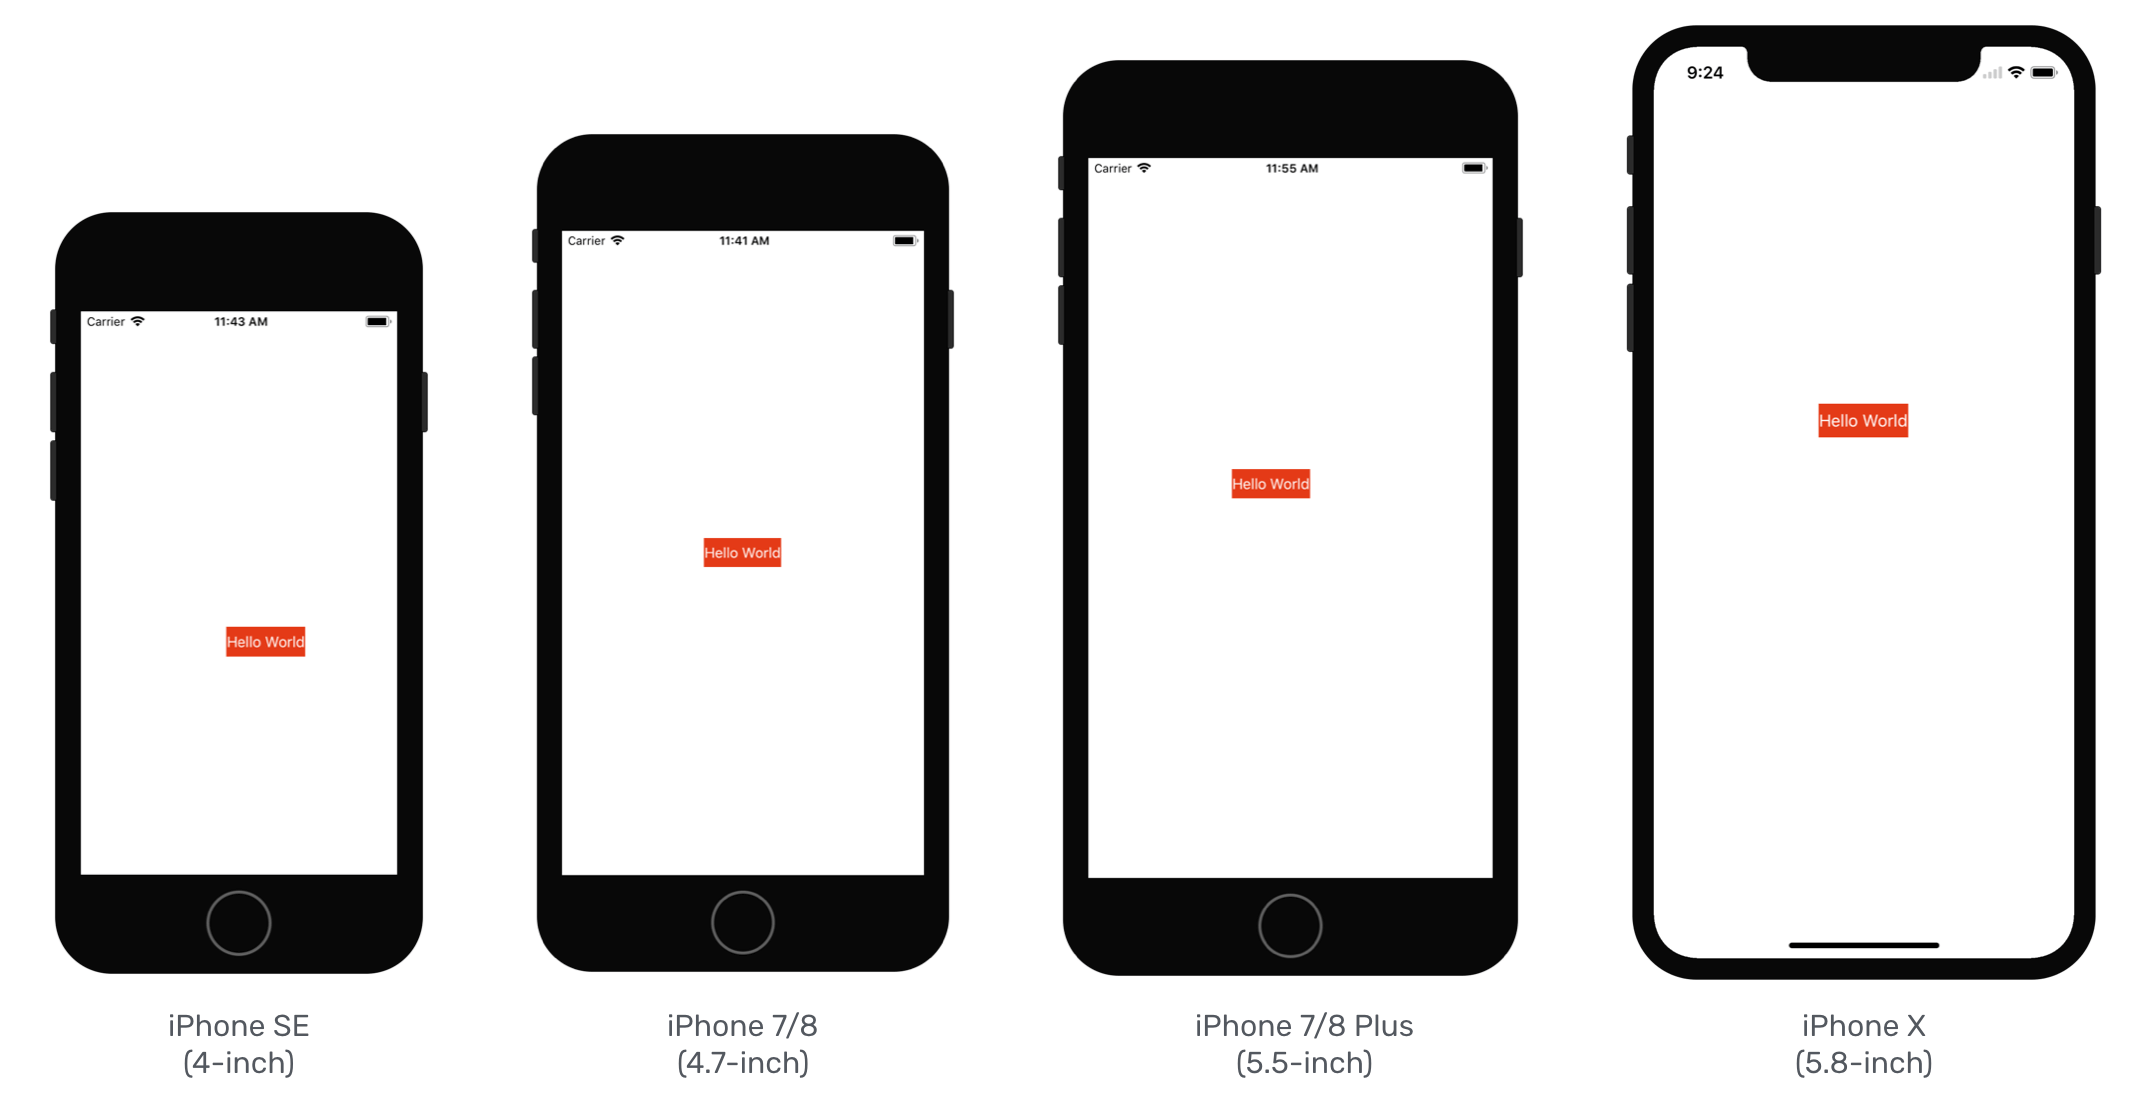 Figure 5-1. The app UI looks different when running on iPhone SE (4-inch), iPhone 7 (4.7-inch) and iPhone 7 Plus (5.5-inch)